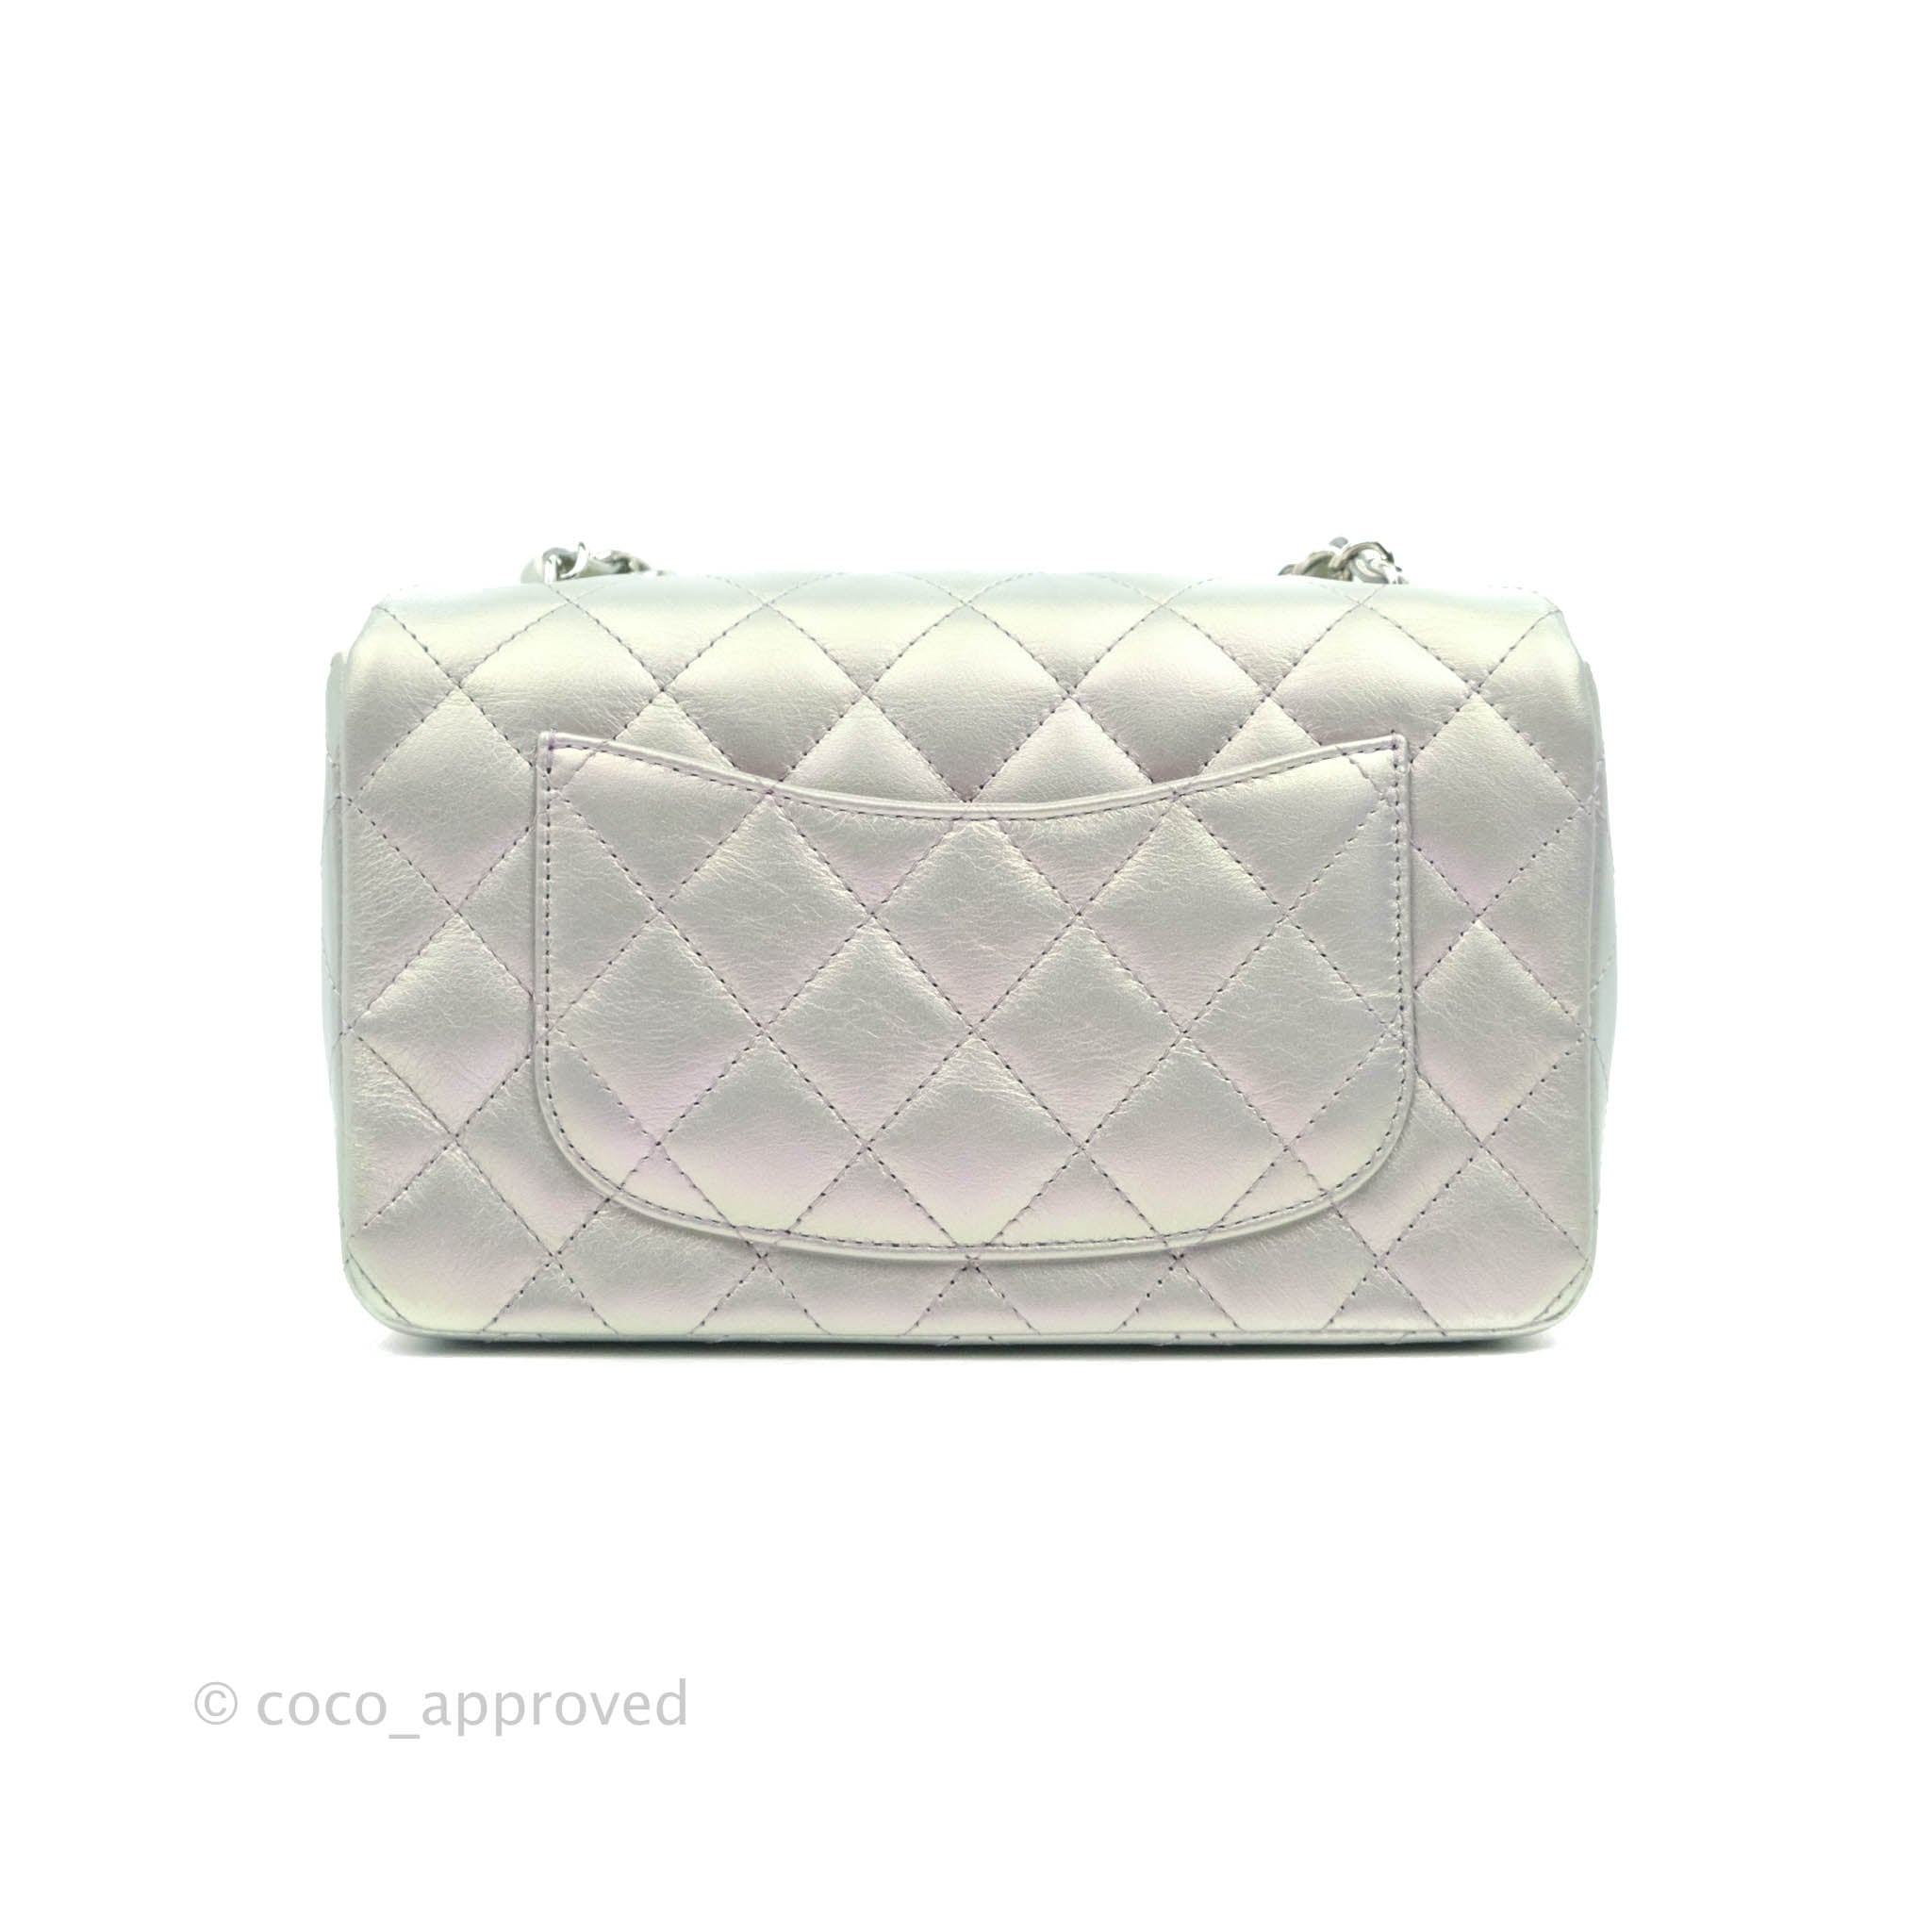 Sold at Auction: Chanel Iridescent Purple Caviar Quilted Mini Flap Bag